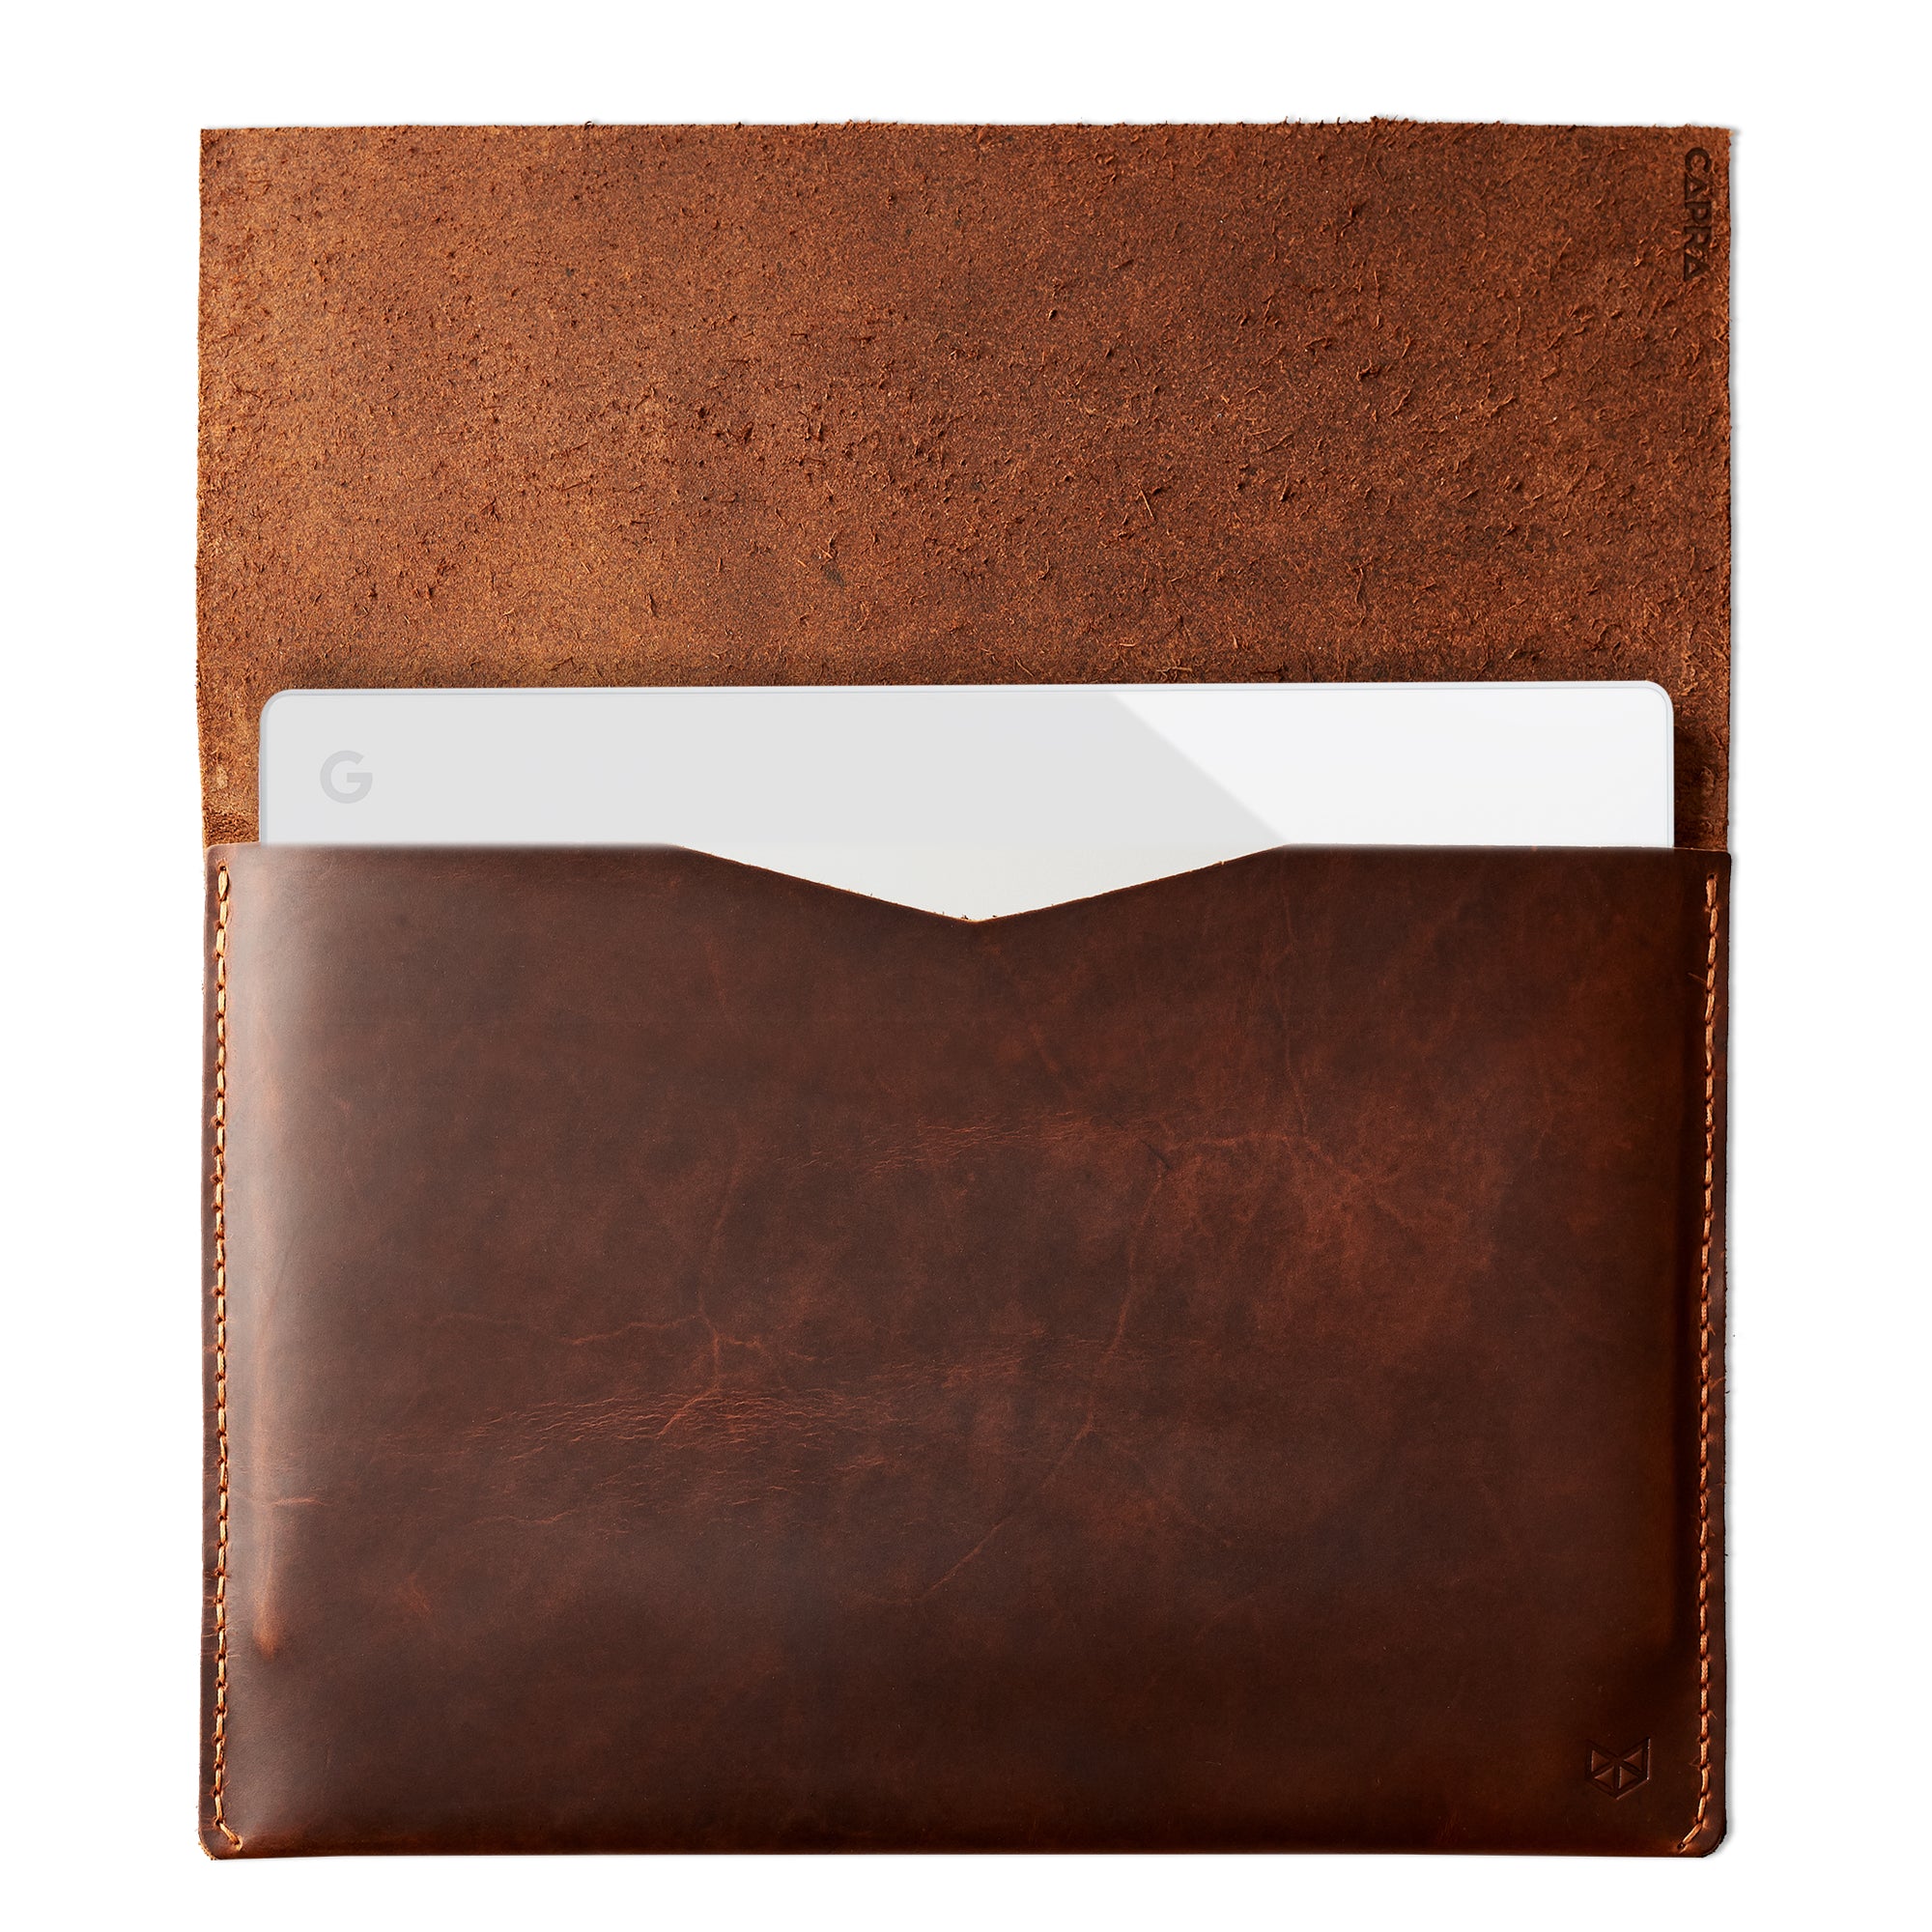 Tan brown leather Macbook pro touch bar sleeve. Designer unique mens cases. Hand stitched Macbook Pro sleeve